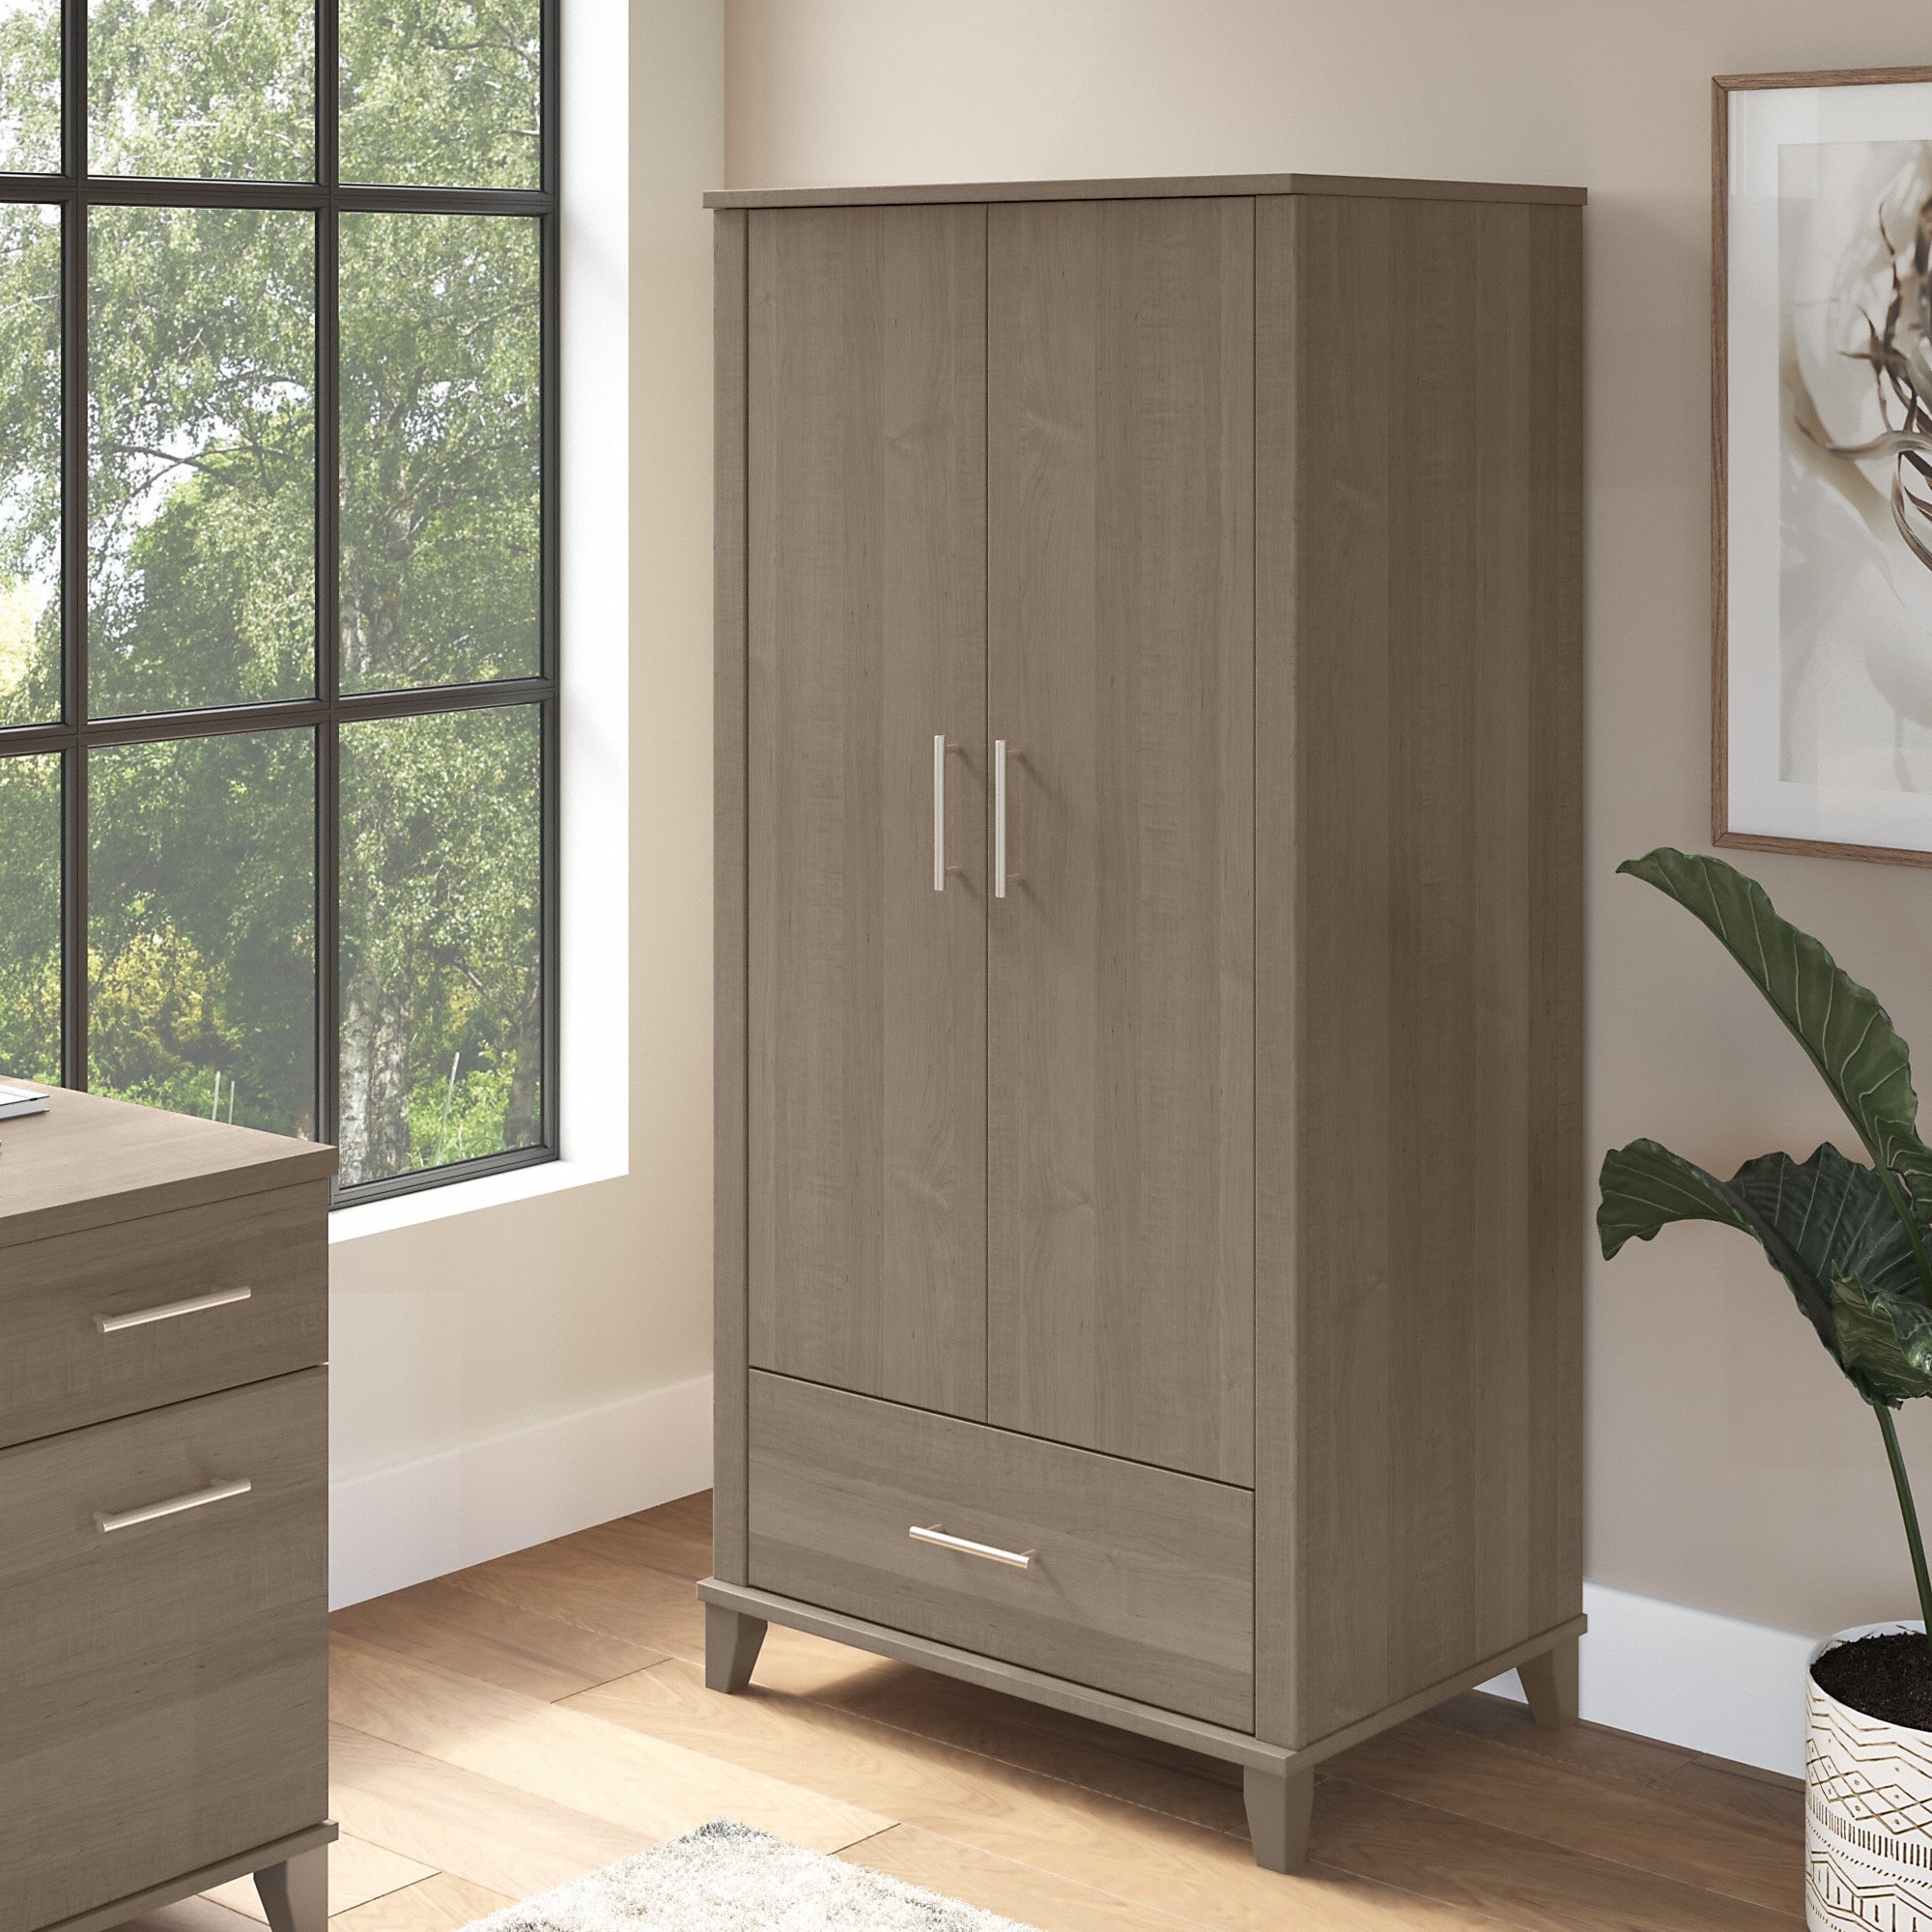 Bush Furniture Cabot Small Storage Cabinet with Doors - Ash Gray